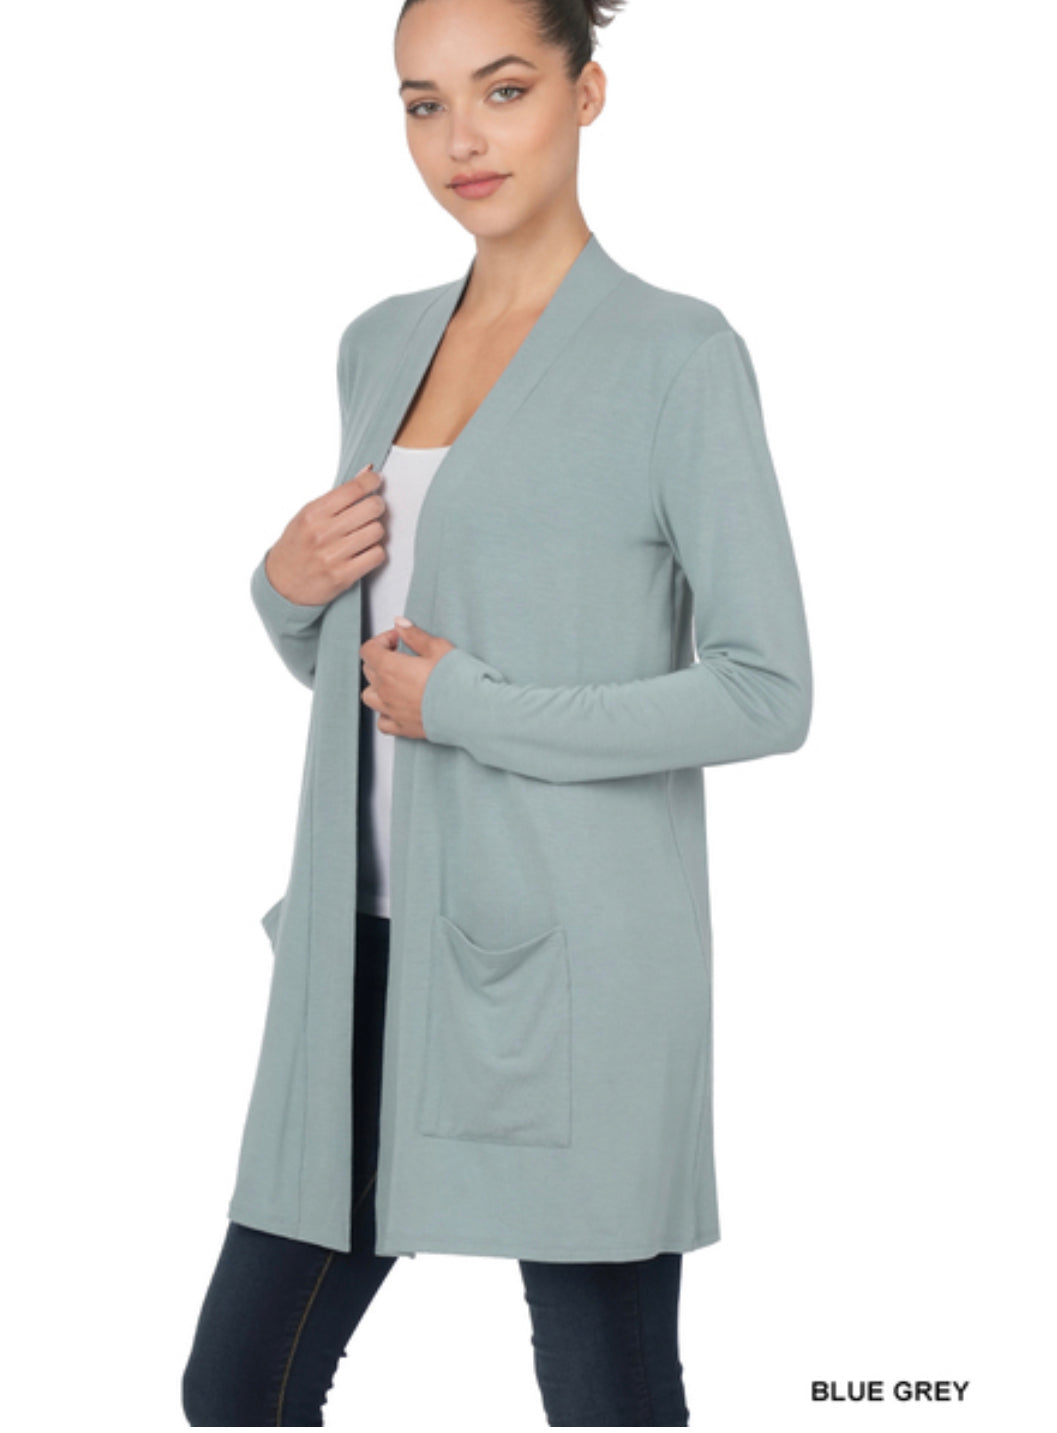 The PERFECT Cardi! 2 Colors!